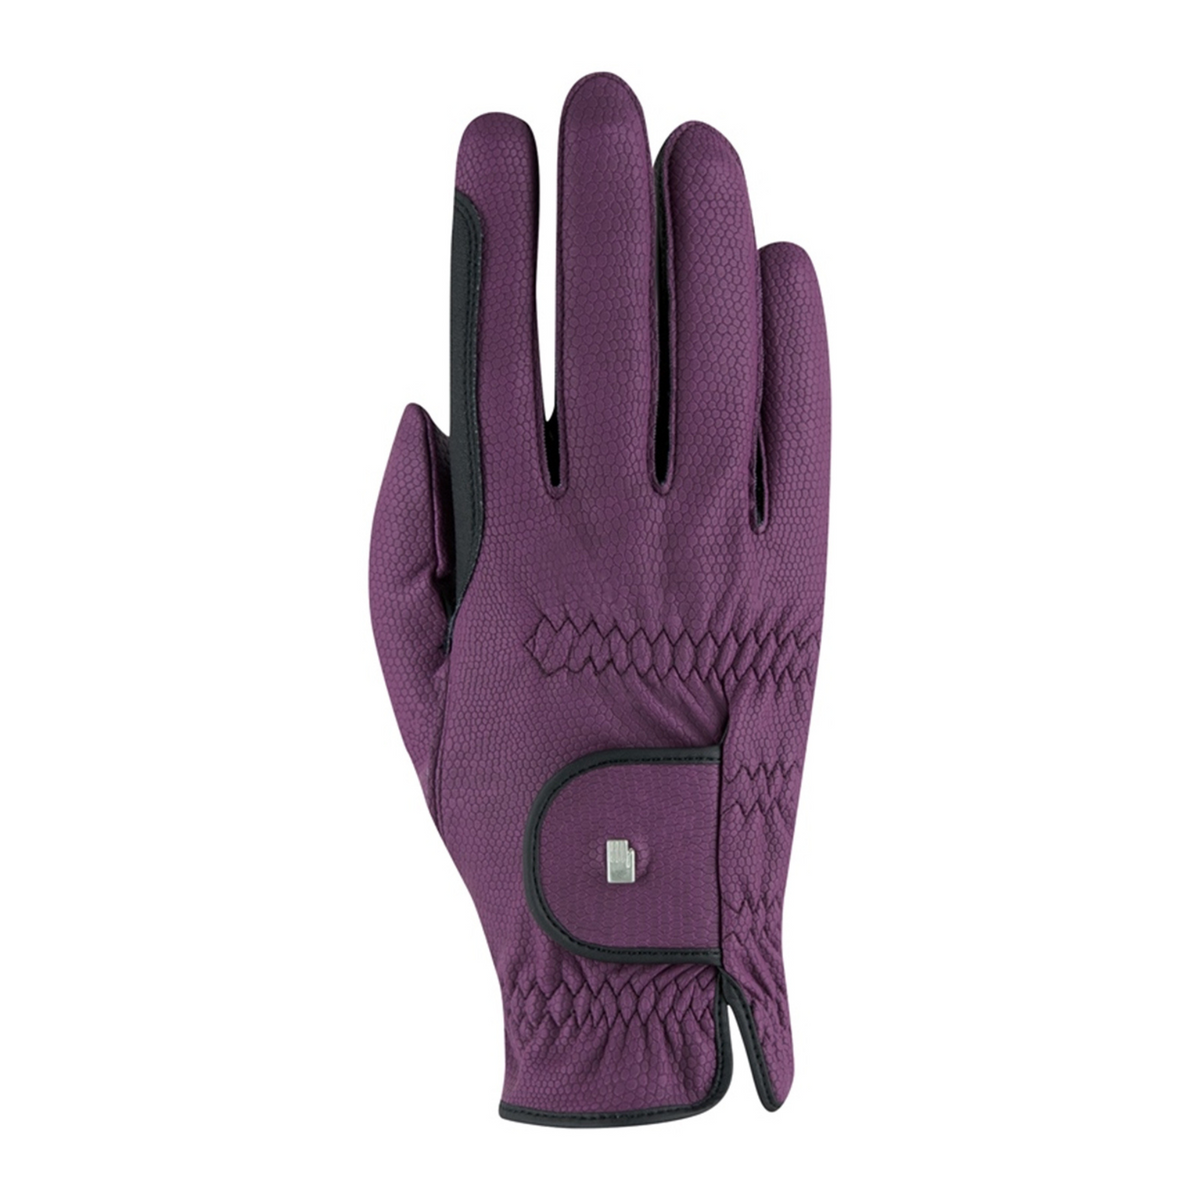 purple horse riding gloves with black binding